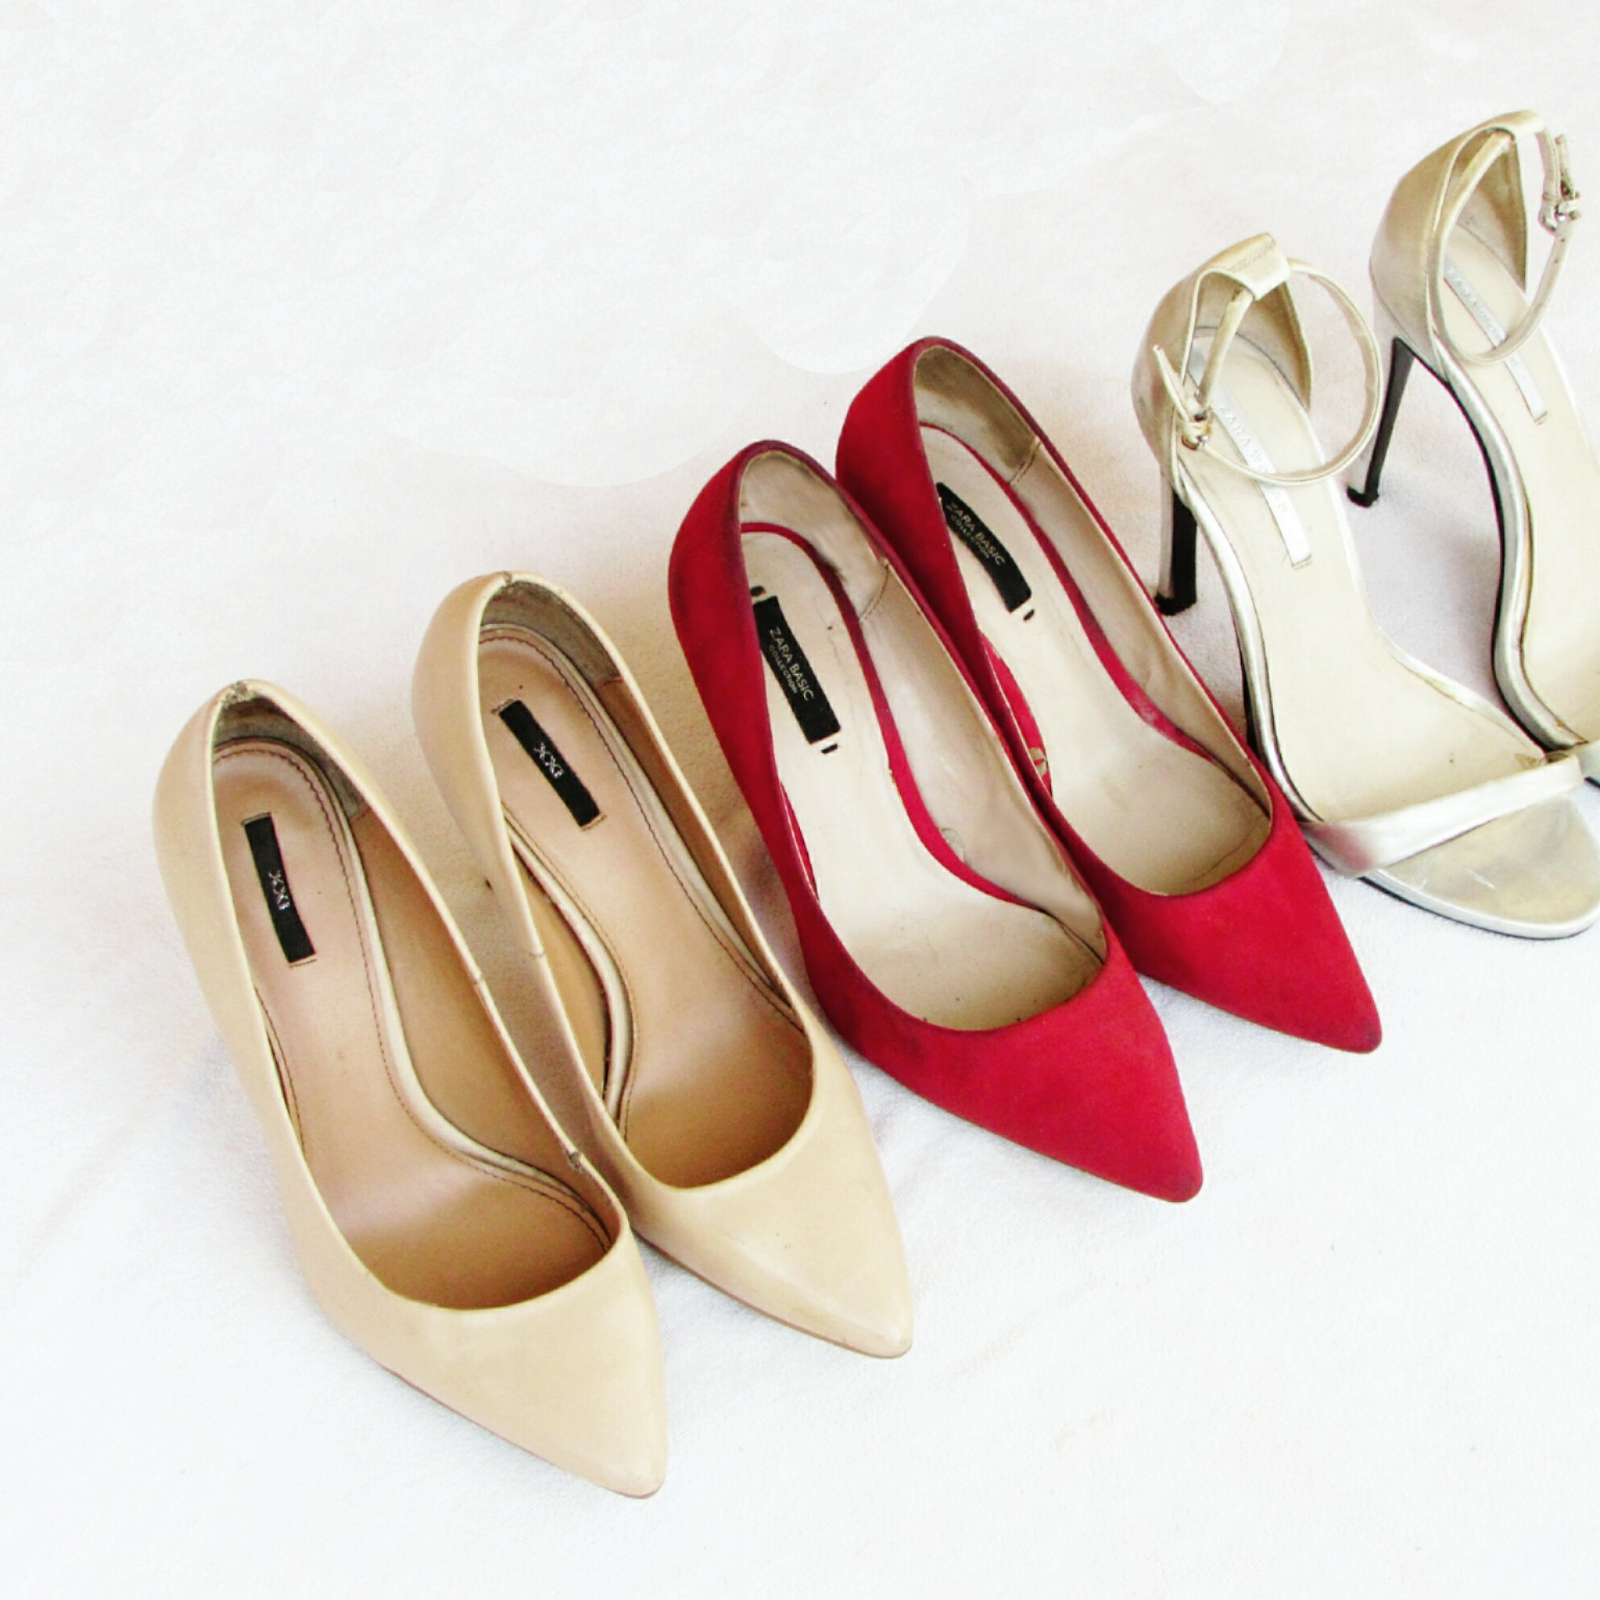 nude pointed pumps, red pumps, silver metallic single sole heels